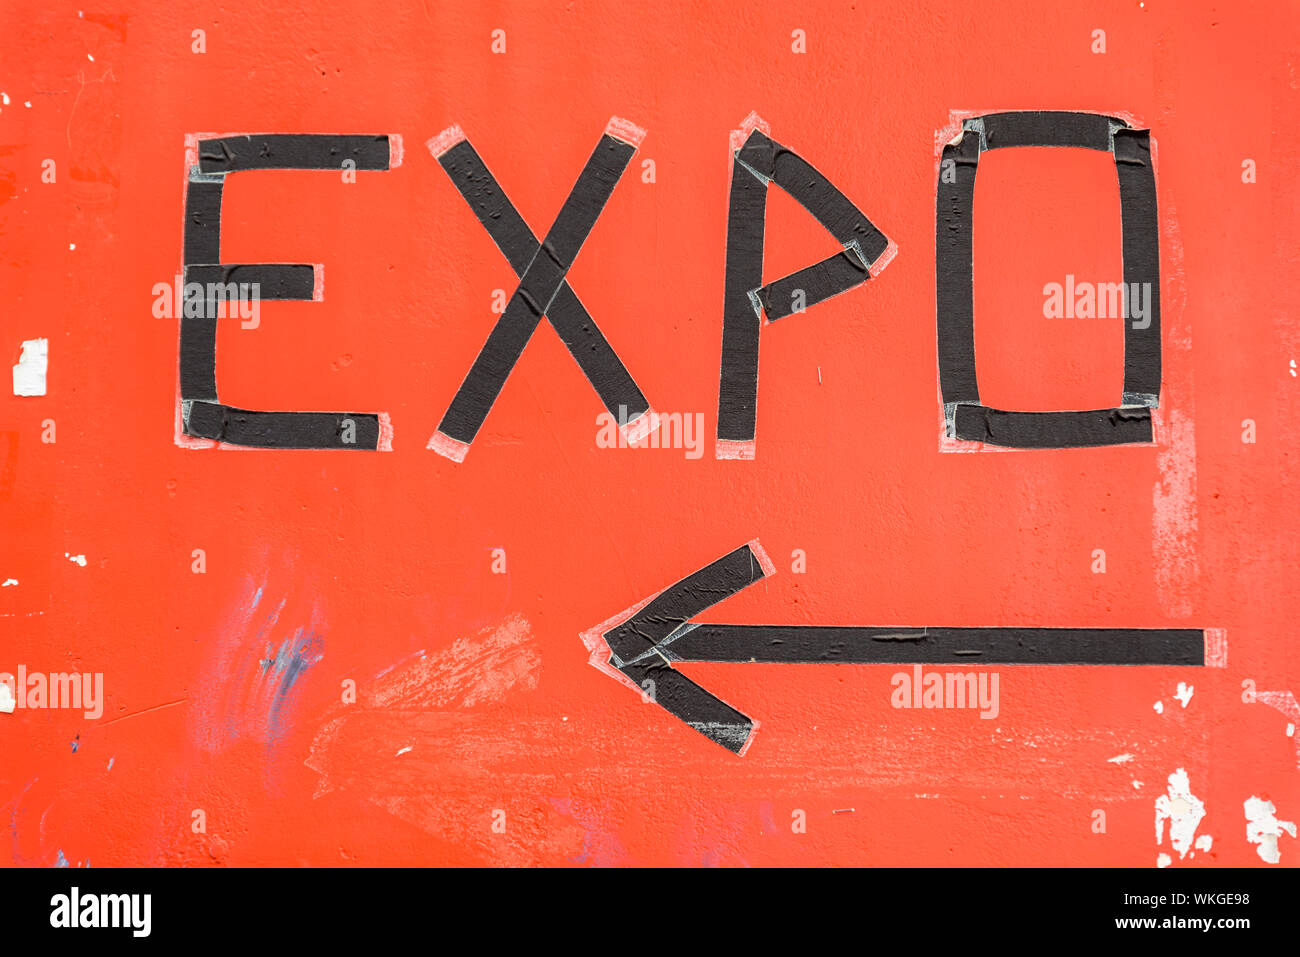 expo sign made of black isolation tape on a worn down orange background Stock Photo